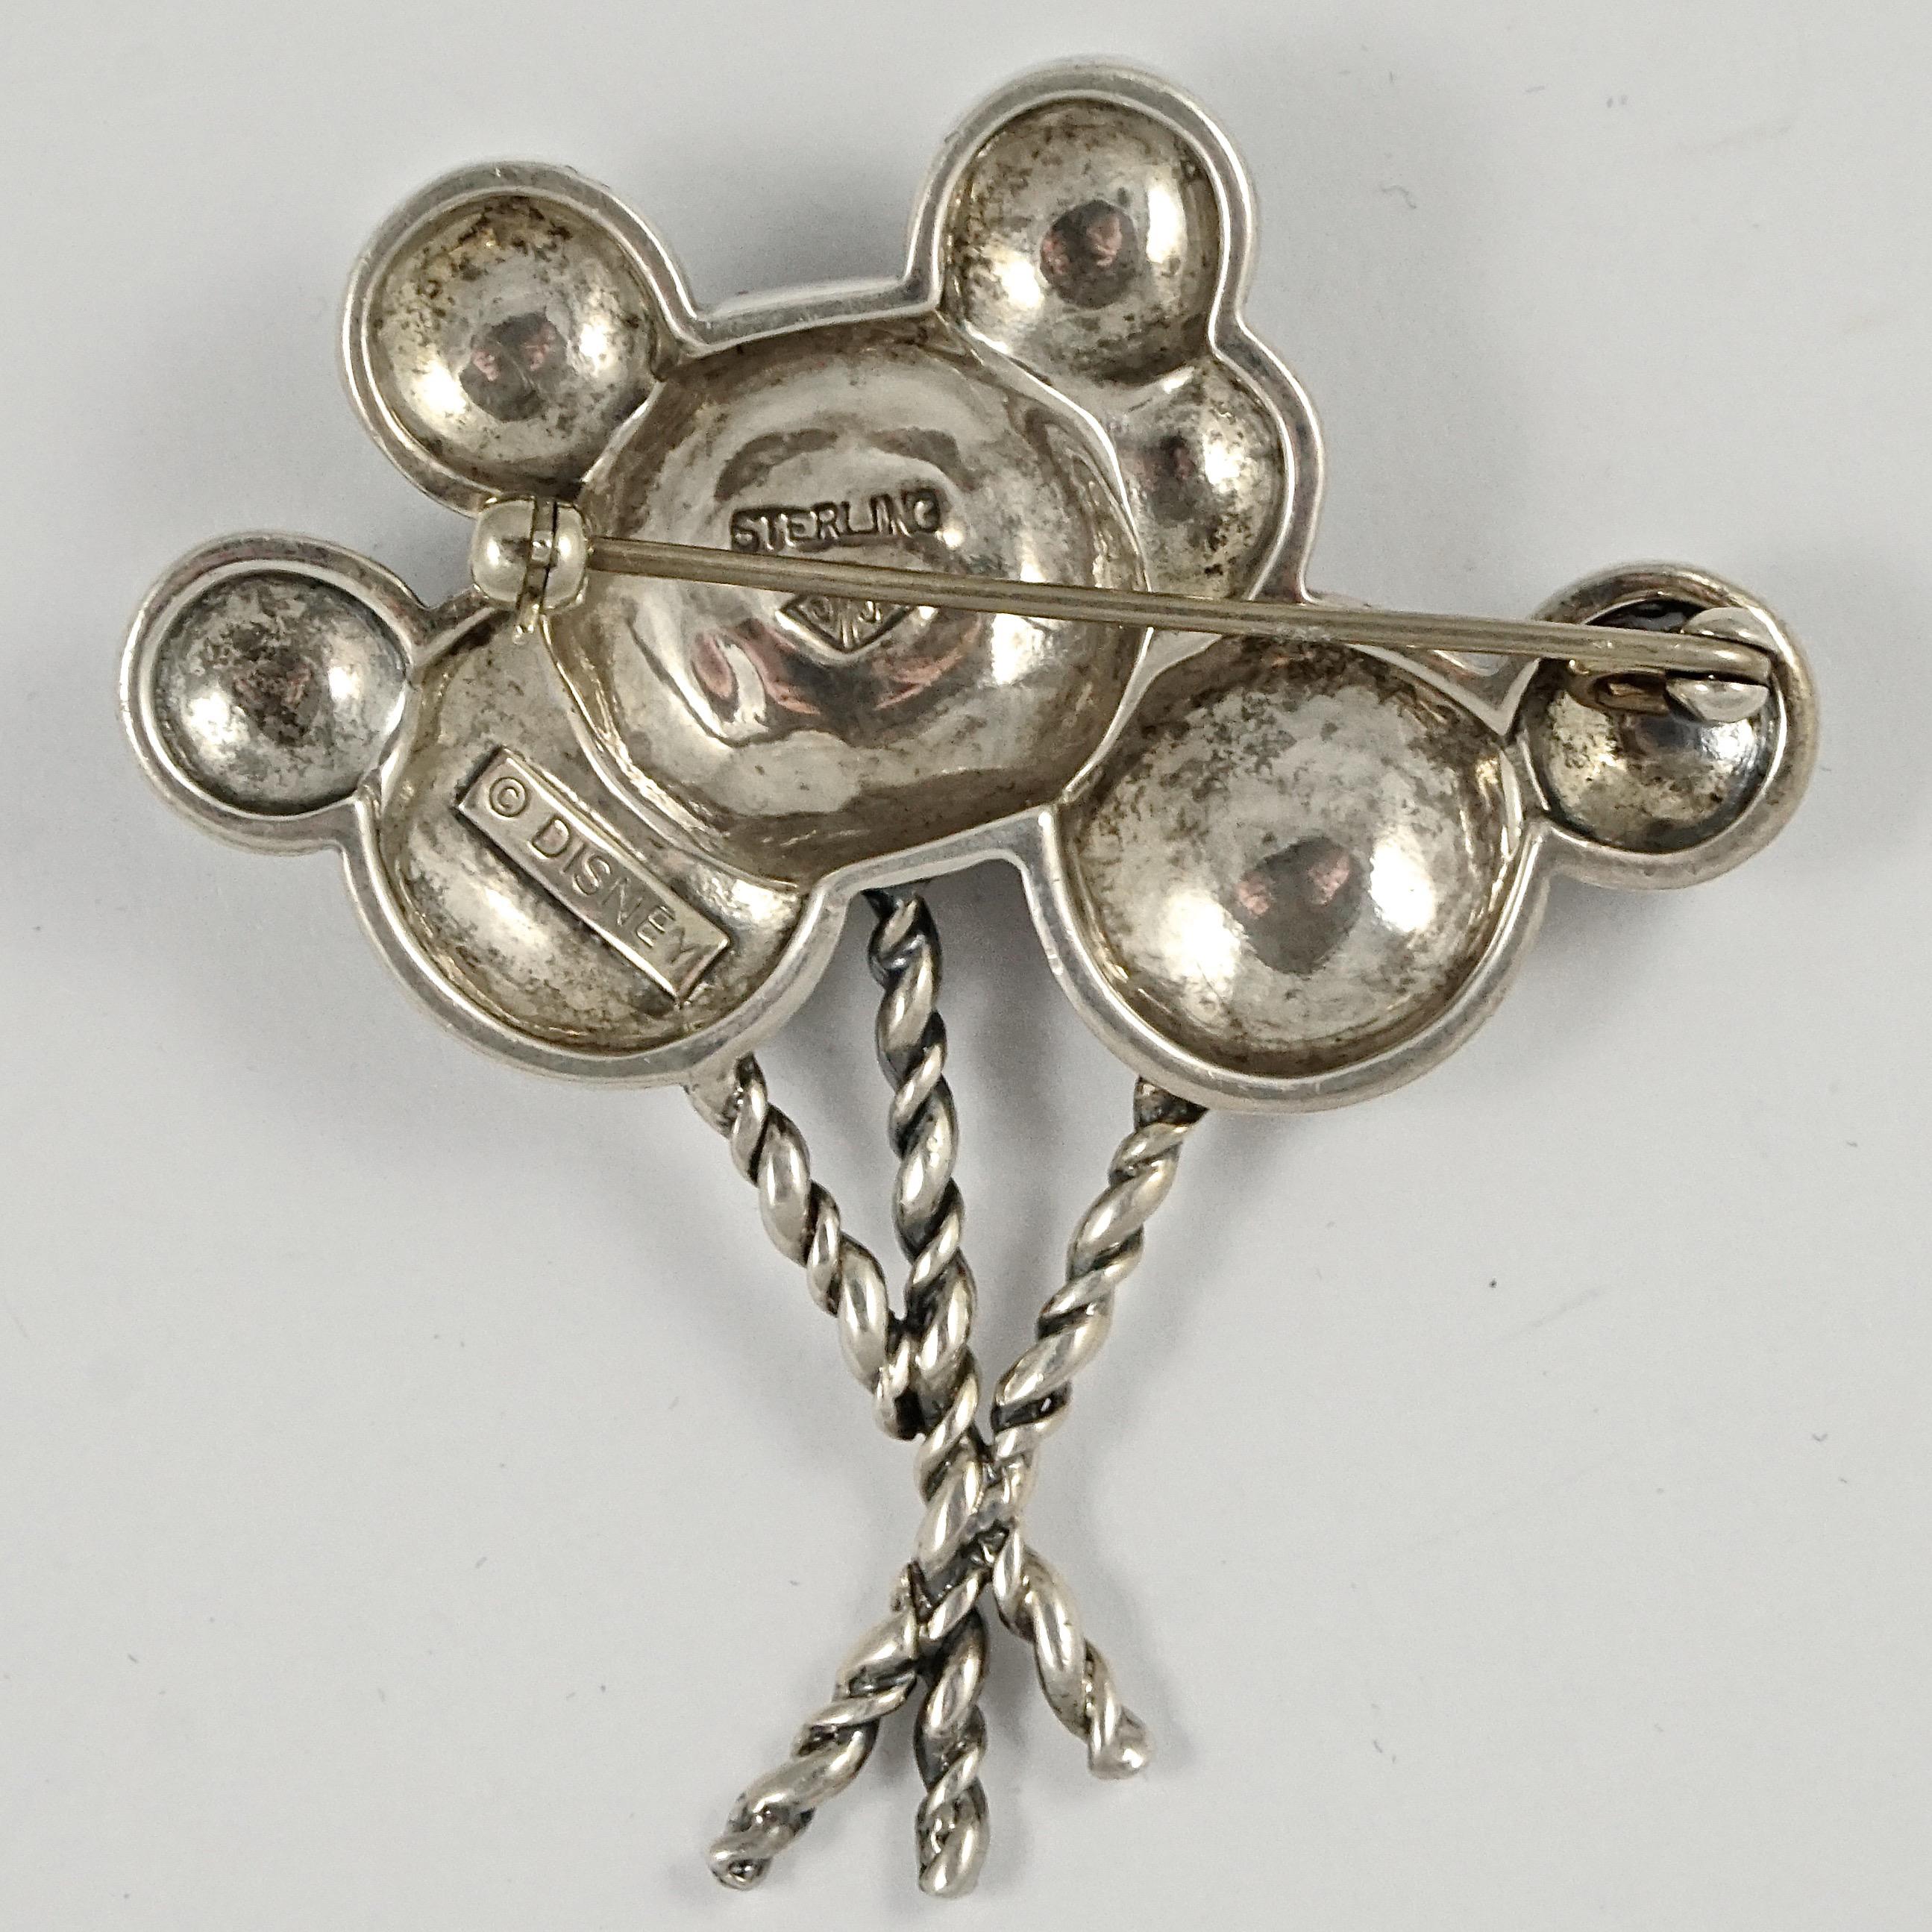 Wonderful Judith Jack sterling silver Disney Mickey Mouse balloon brooch, with rope twist detail and embellished with marcasites. Measuring length 5cm / 1.9 inches by width 4.7cm / 1.85 inches. The brooch is in very good condition.

This is a lovely